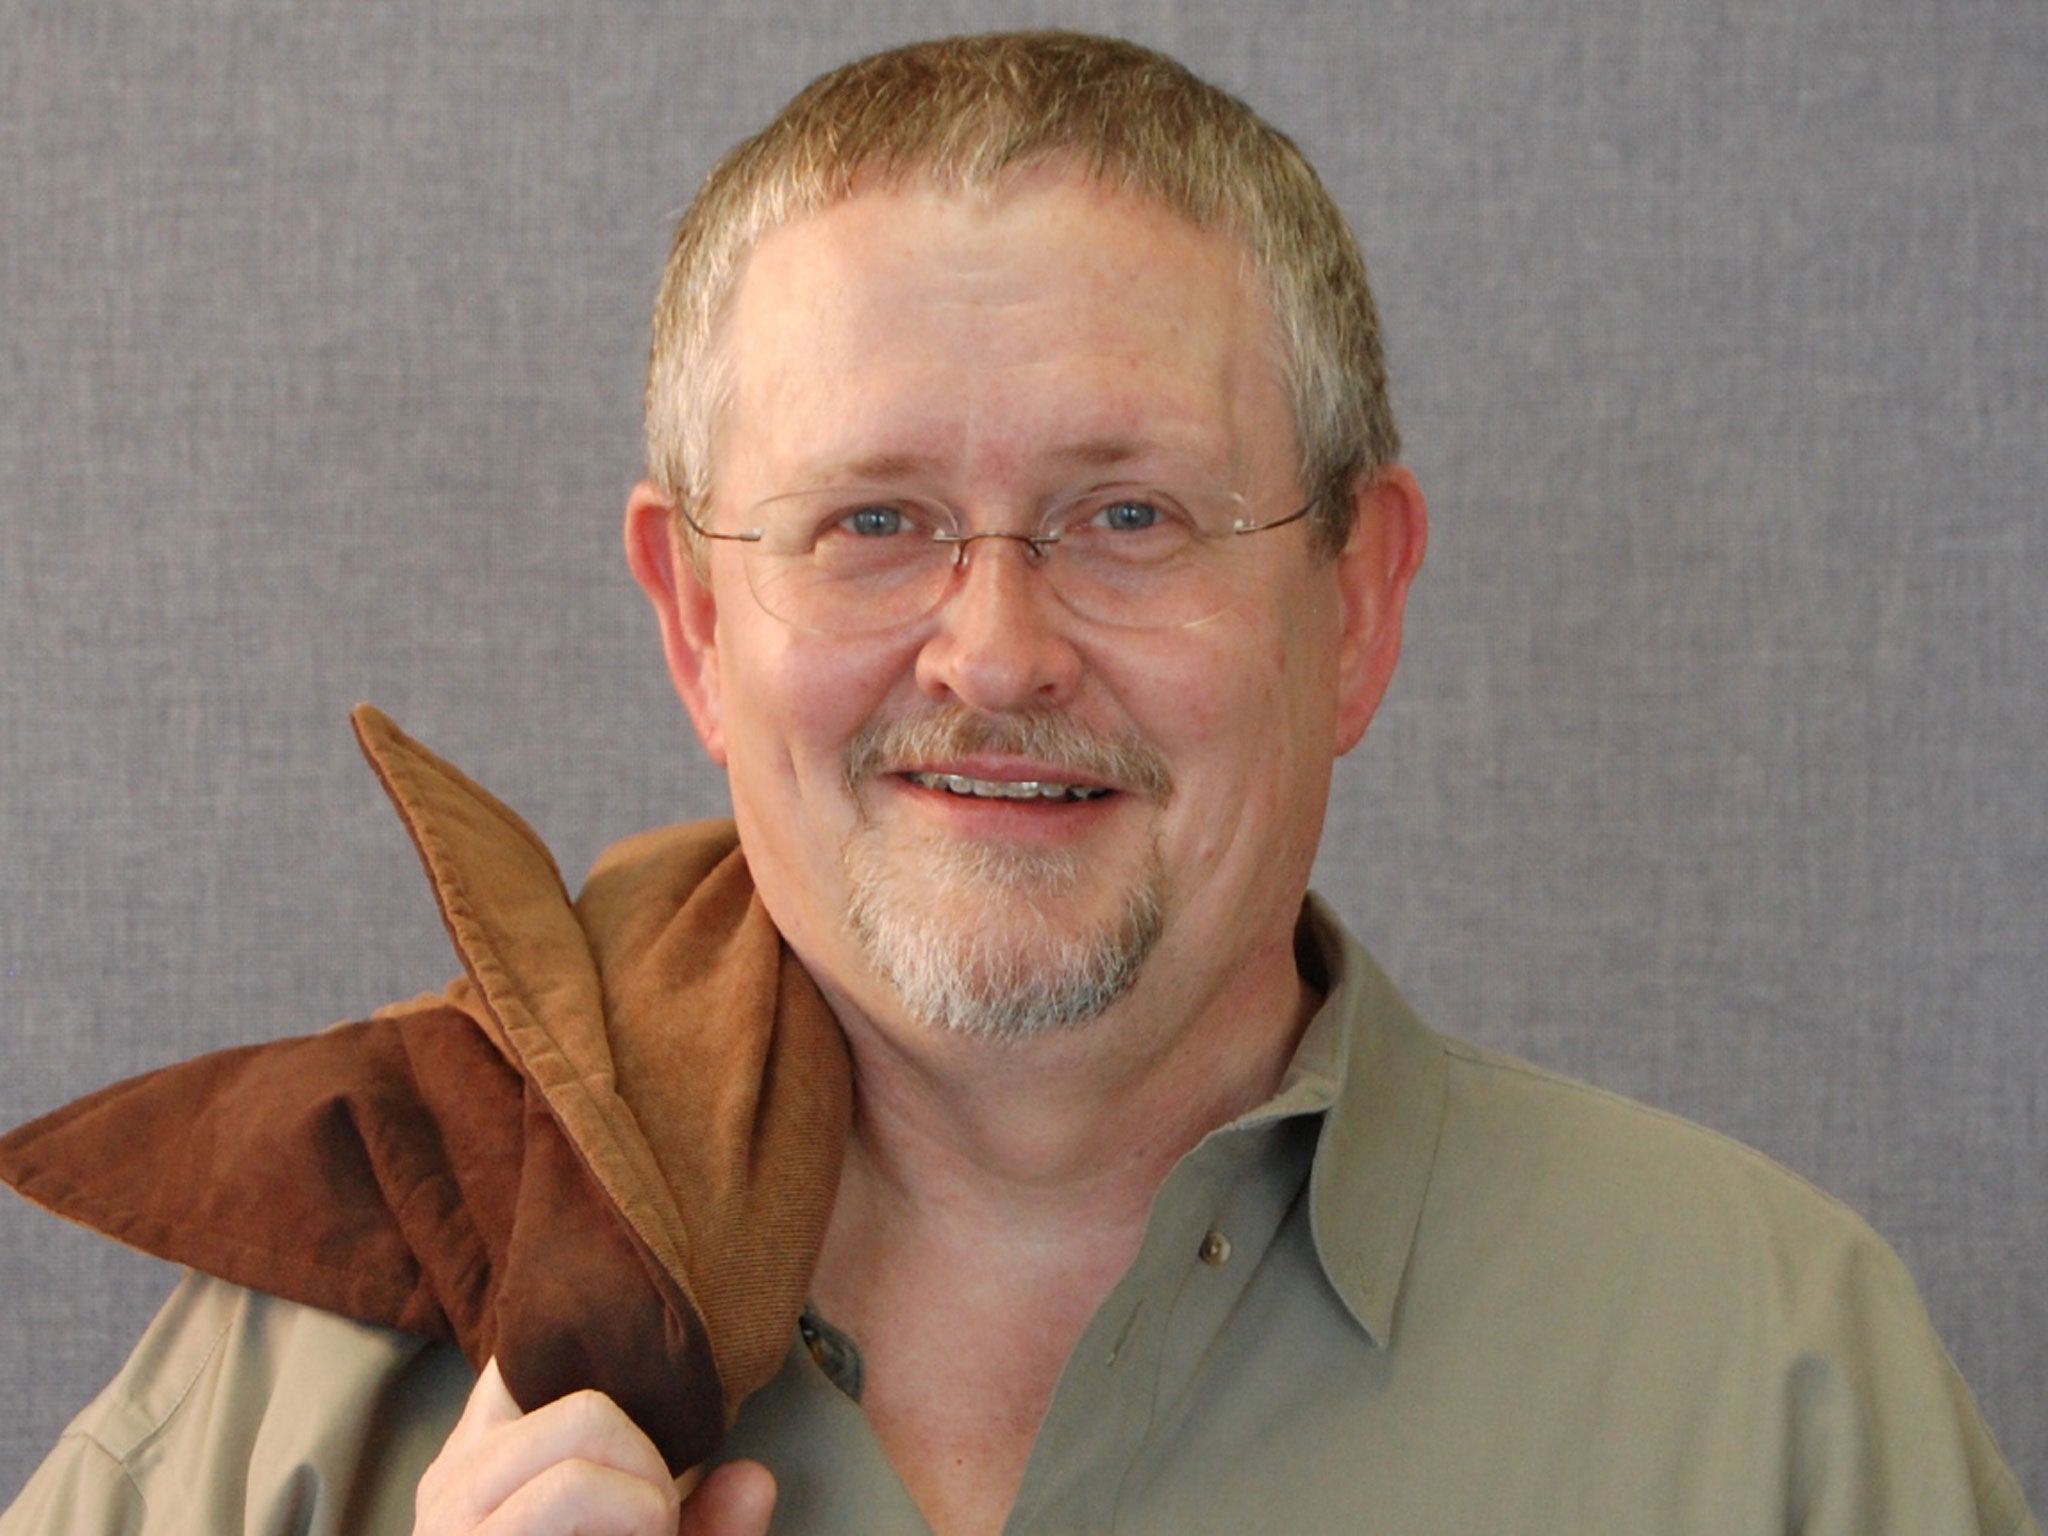 The novelist, Orson Scott Card, has established himself as a leading opponent of same-sex marriage in the US and has even been quoted calling for homosexuality to be made illegal